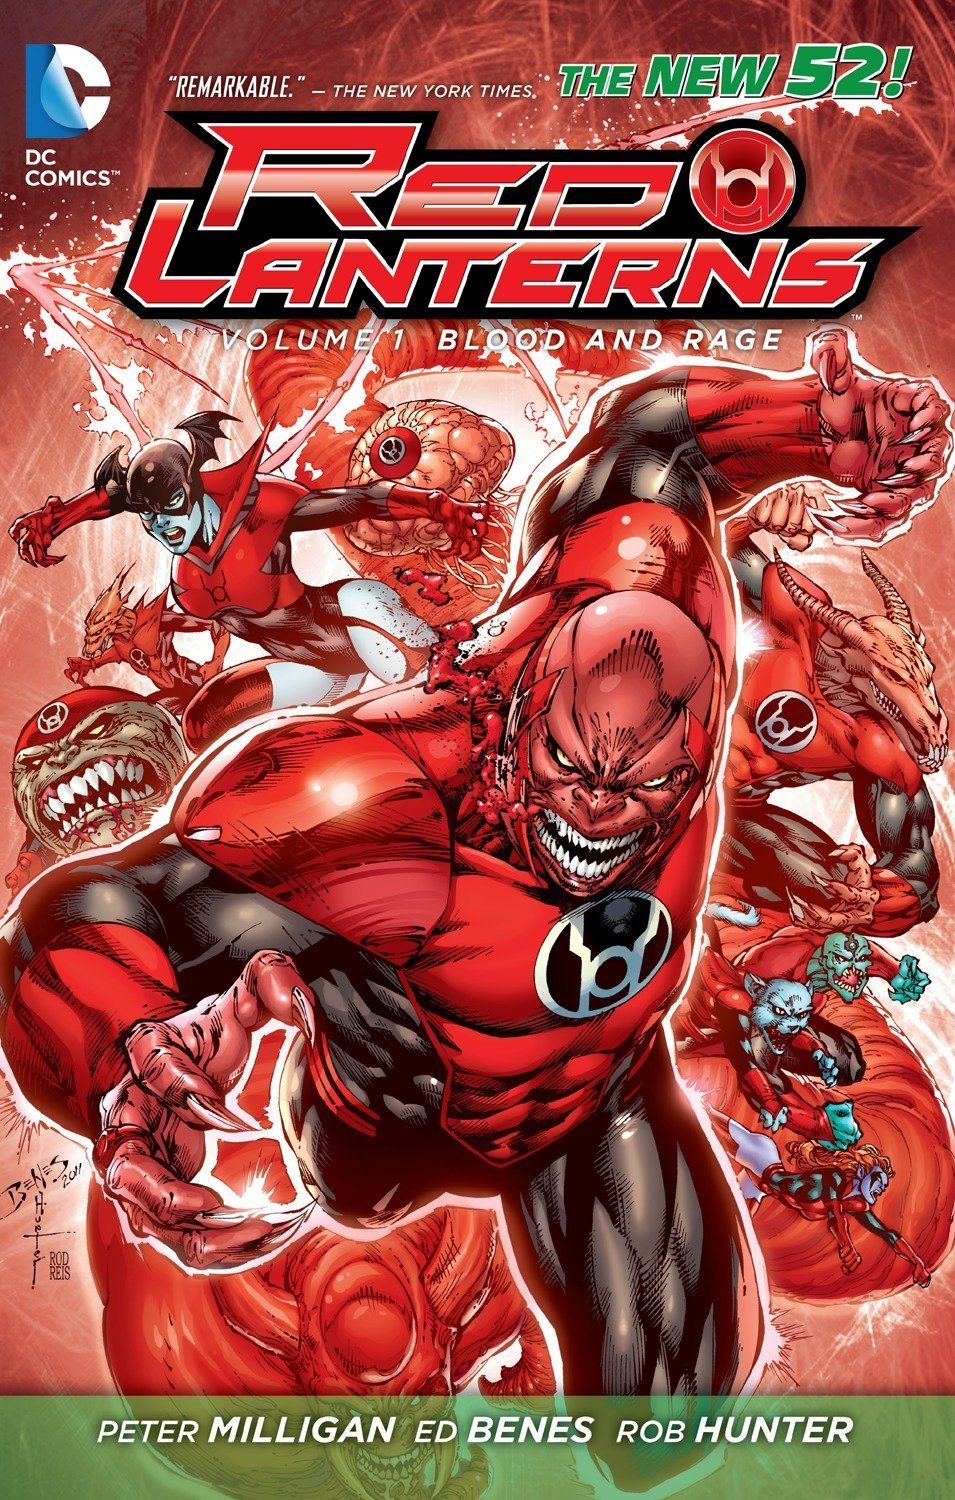 Red Lanterns Vol. 1: Blood and Rage (The New 52): Milligan, Peter, Benes, Ed: 9781401234911: Books